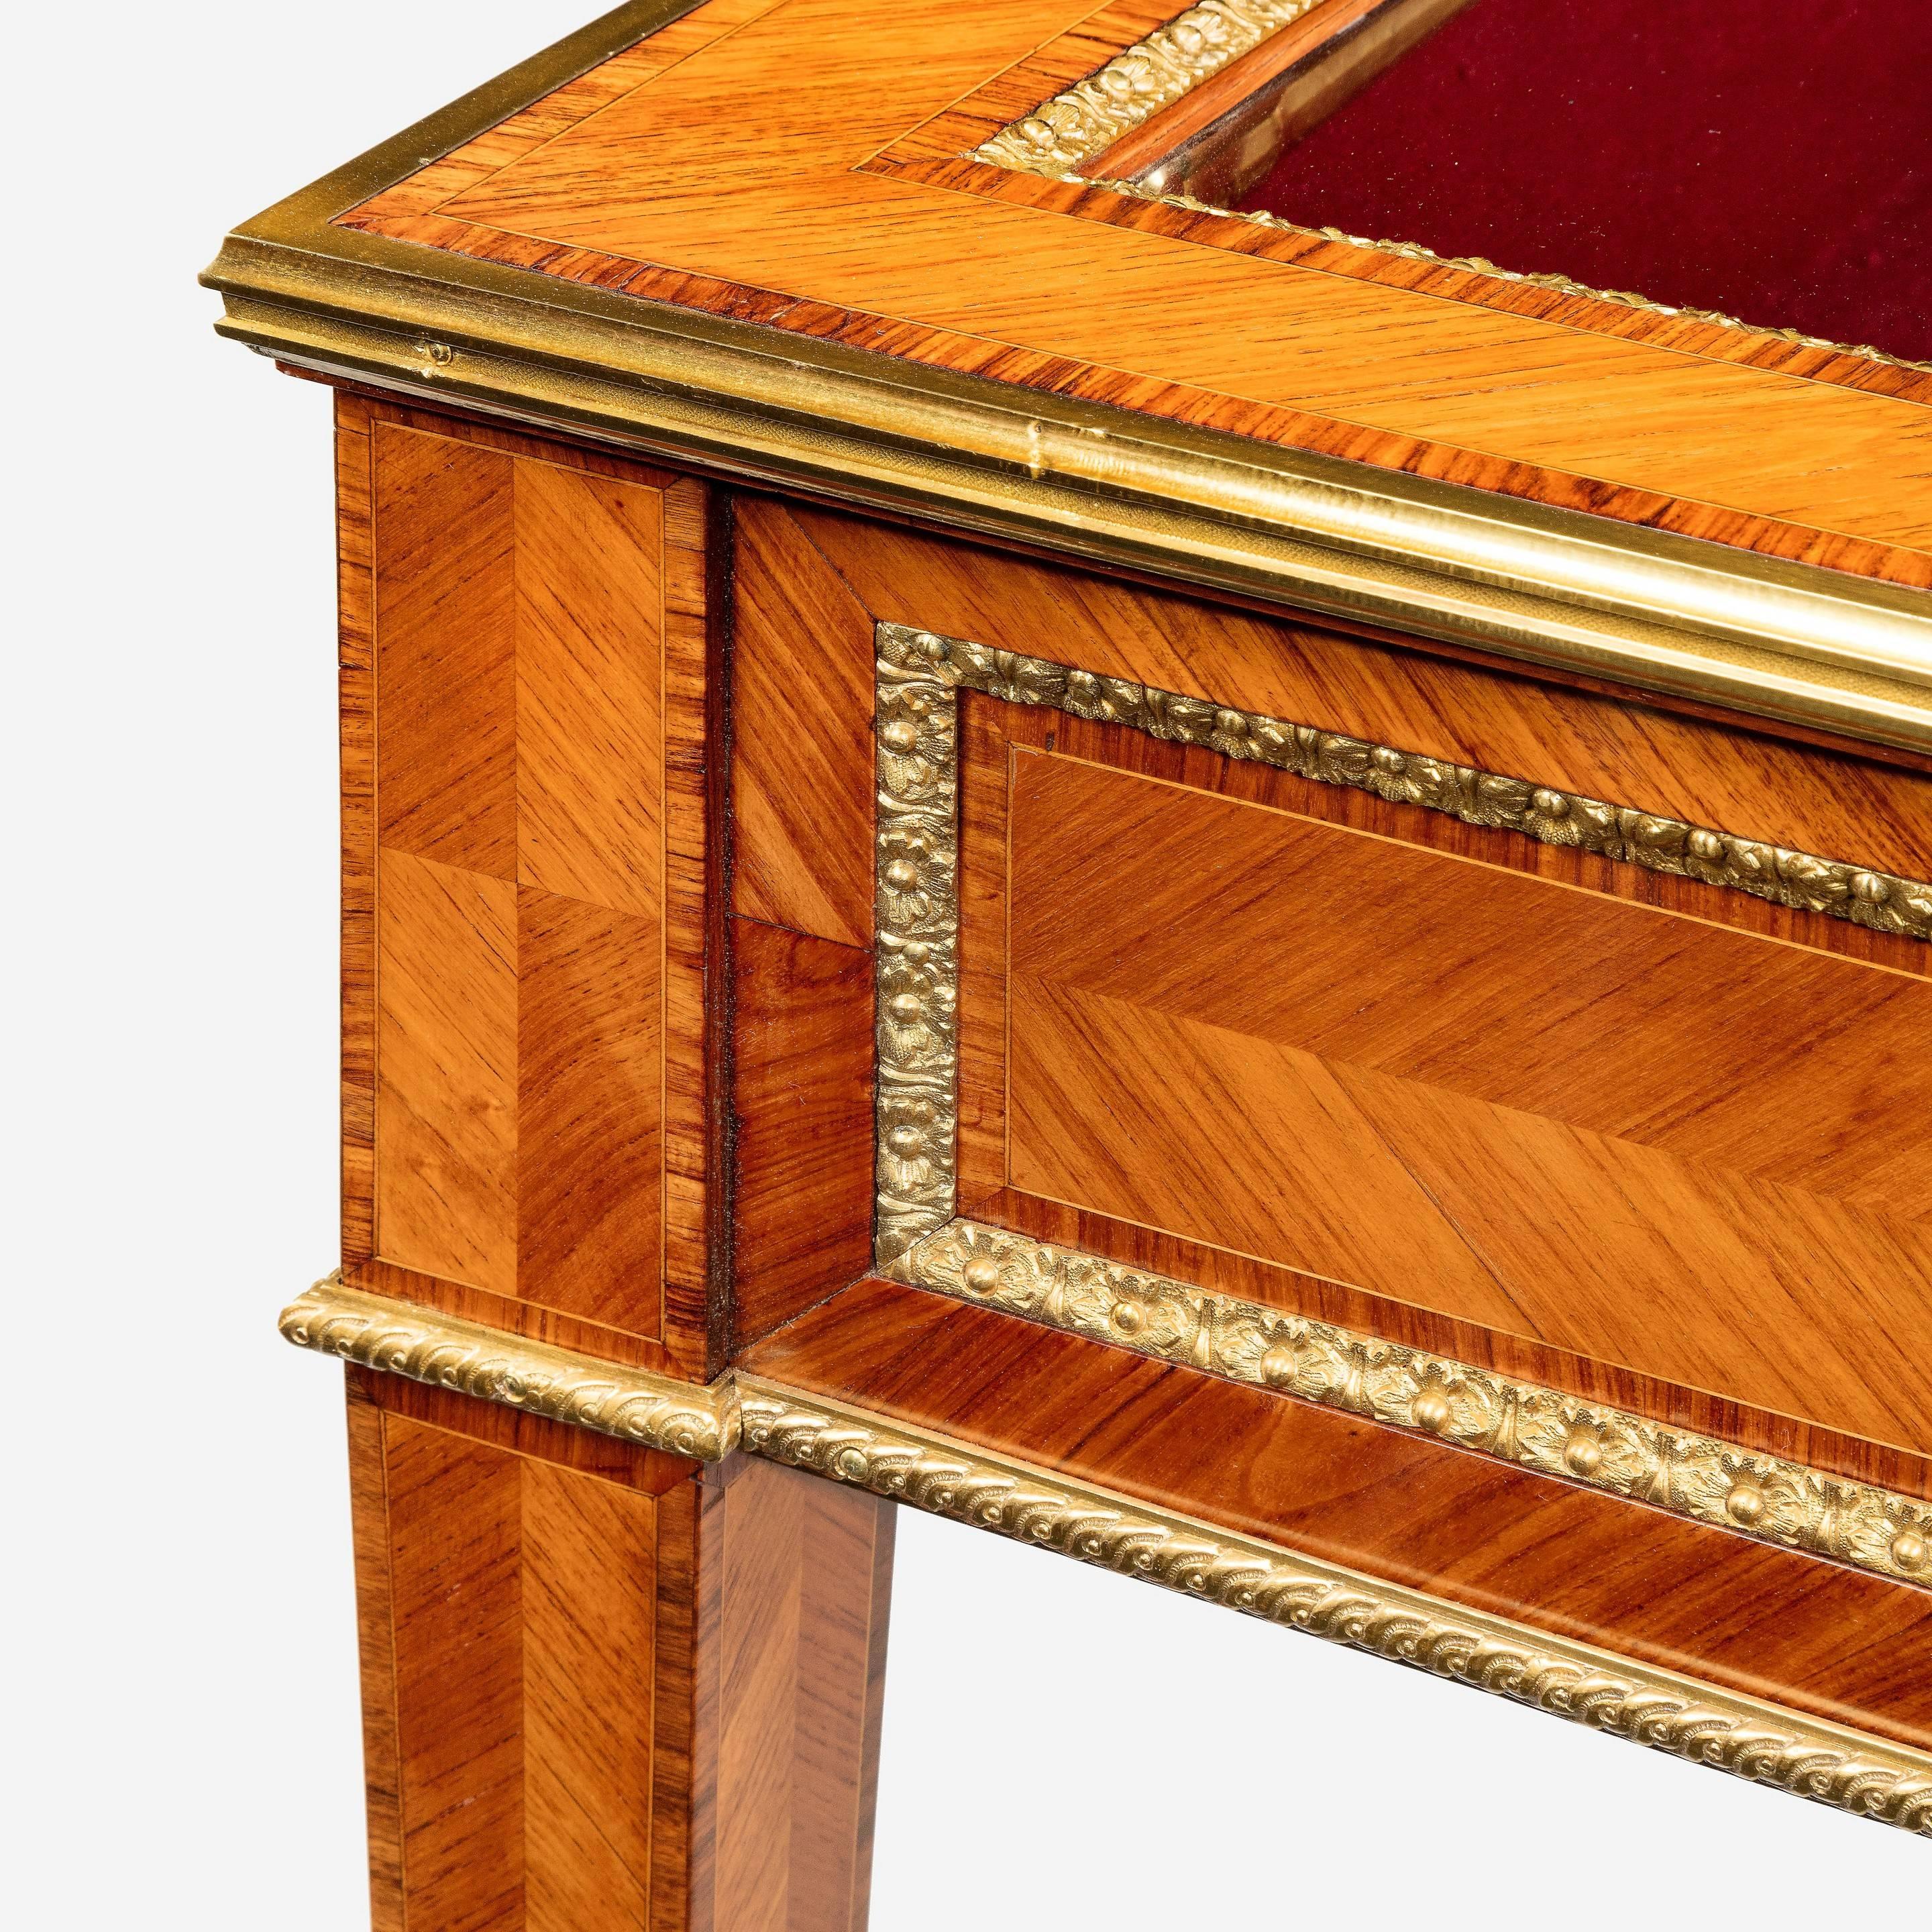 A matched pair of English Kingwood display tables in the French taste, each of rectangular form with slender tapering legs and glazed top, decorated with quarter veneers, tulipwood cross banding and superb quality ormolu mounts.